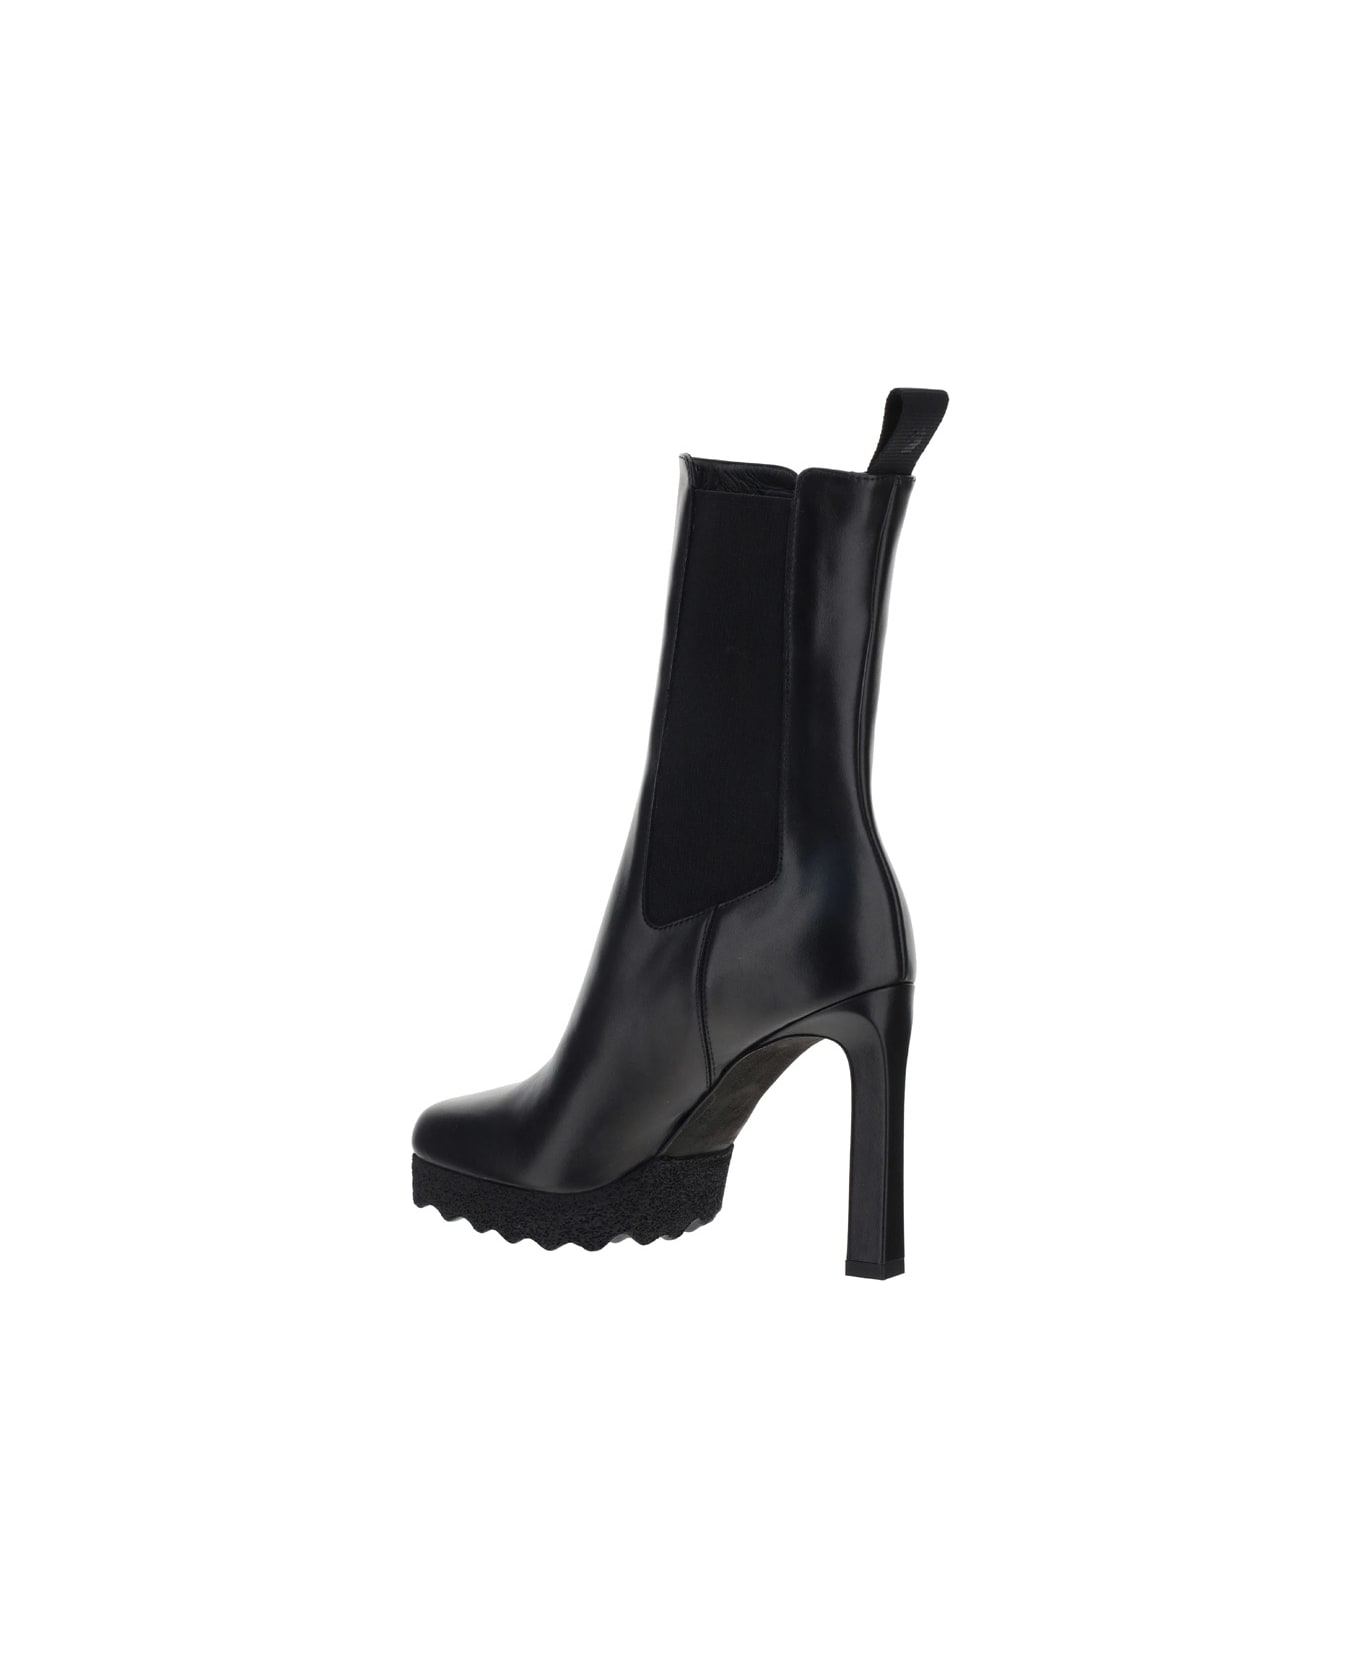 Off-White Heeled Chelsea Ankle Boots | italist